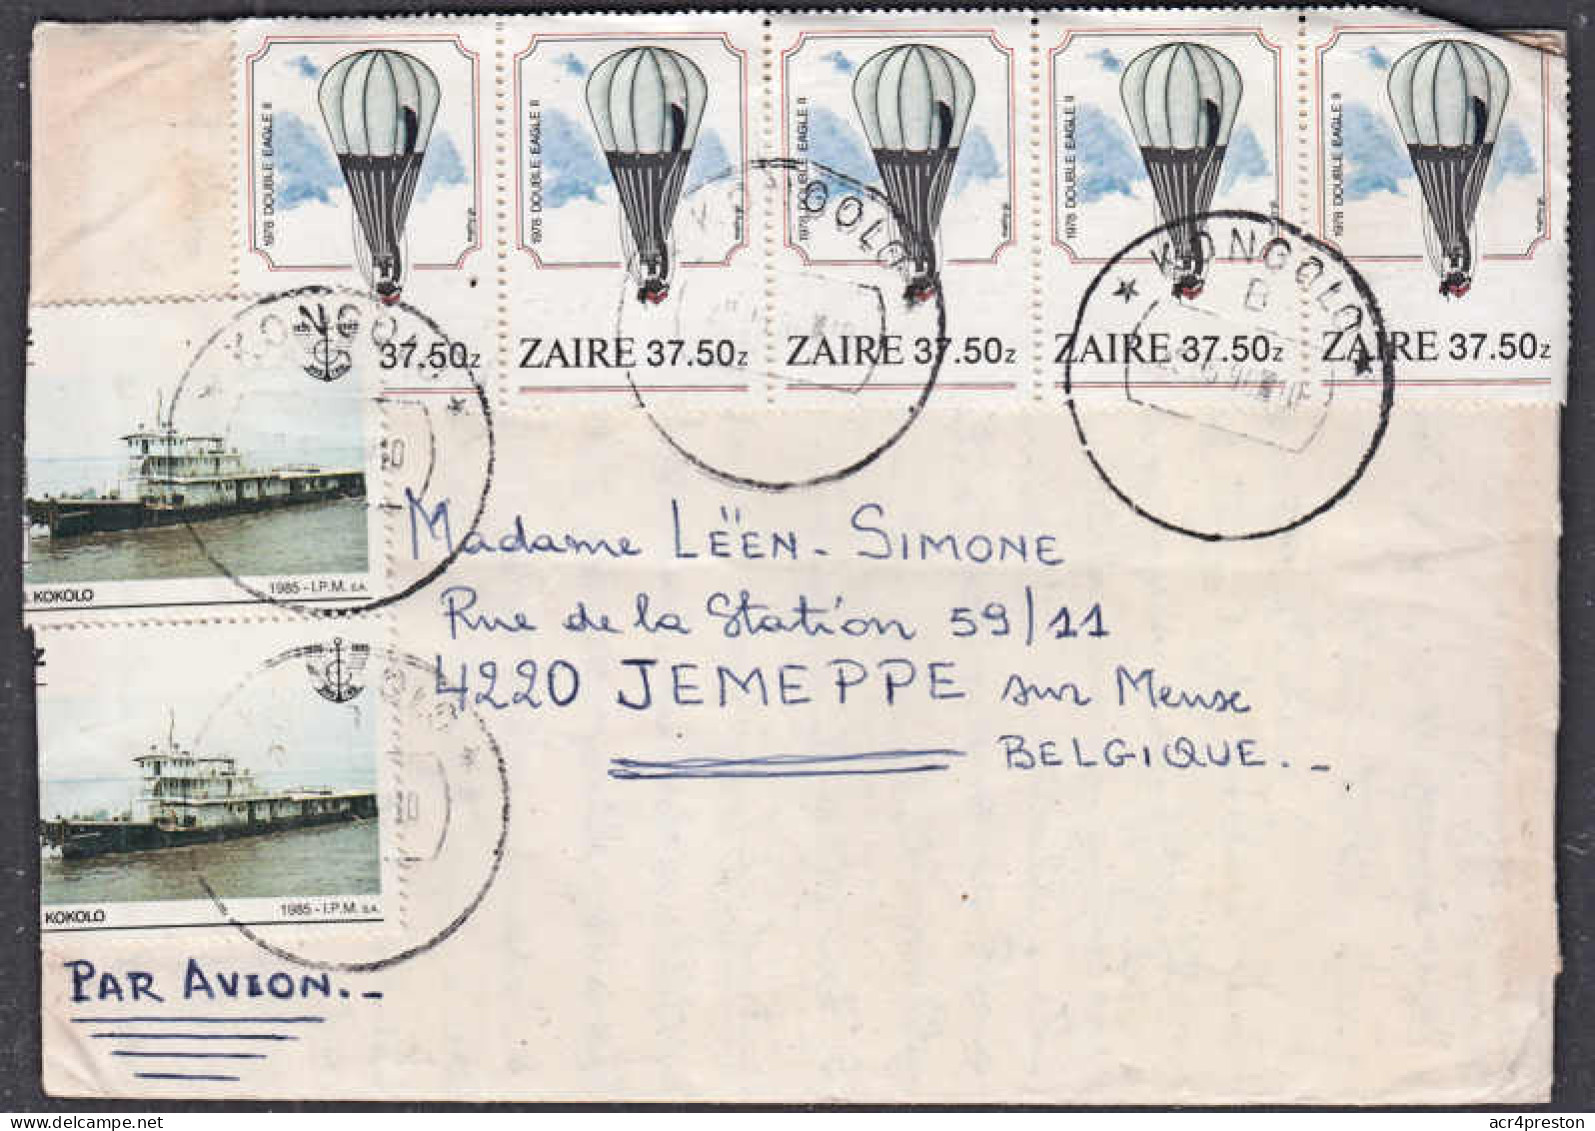 Cb0109 ZAIRE 1990, Balloon And Boat Stamps On Kongolo Cover To Belgium - Covers & Documents